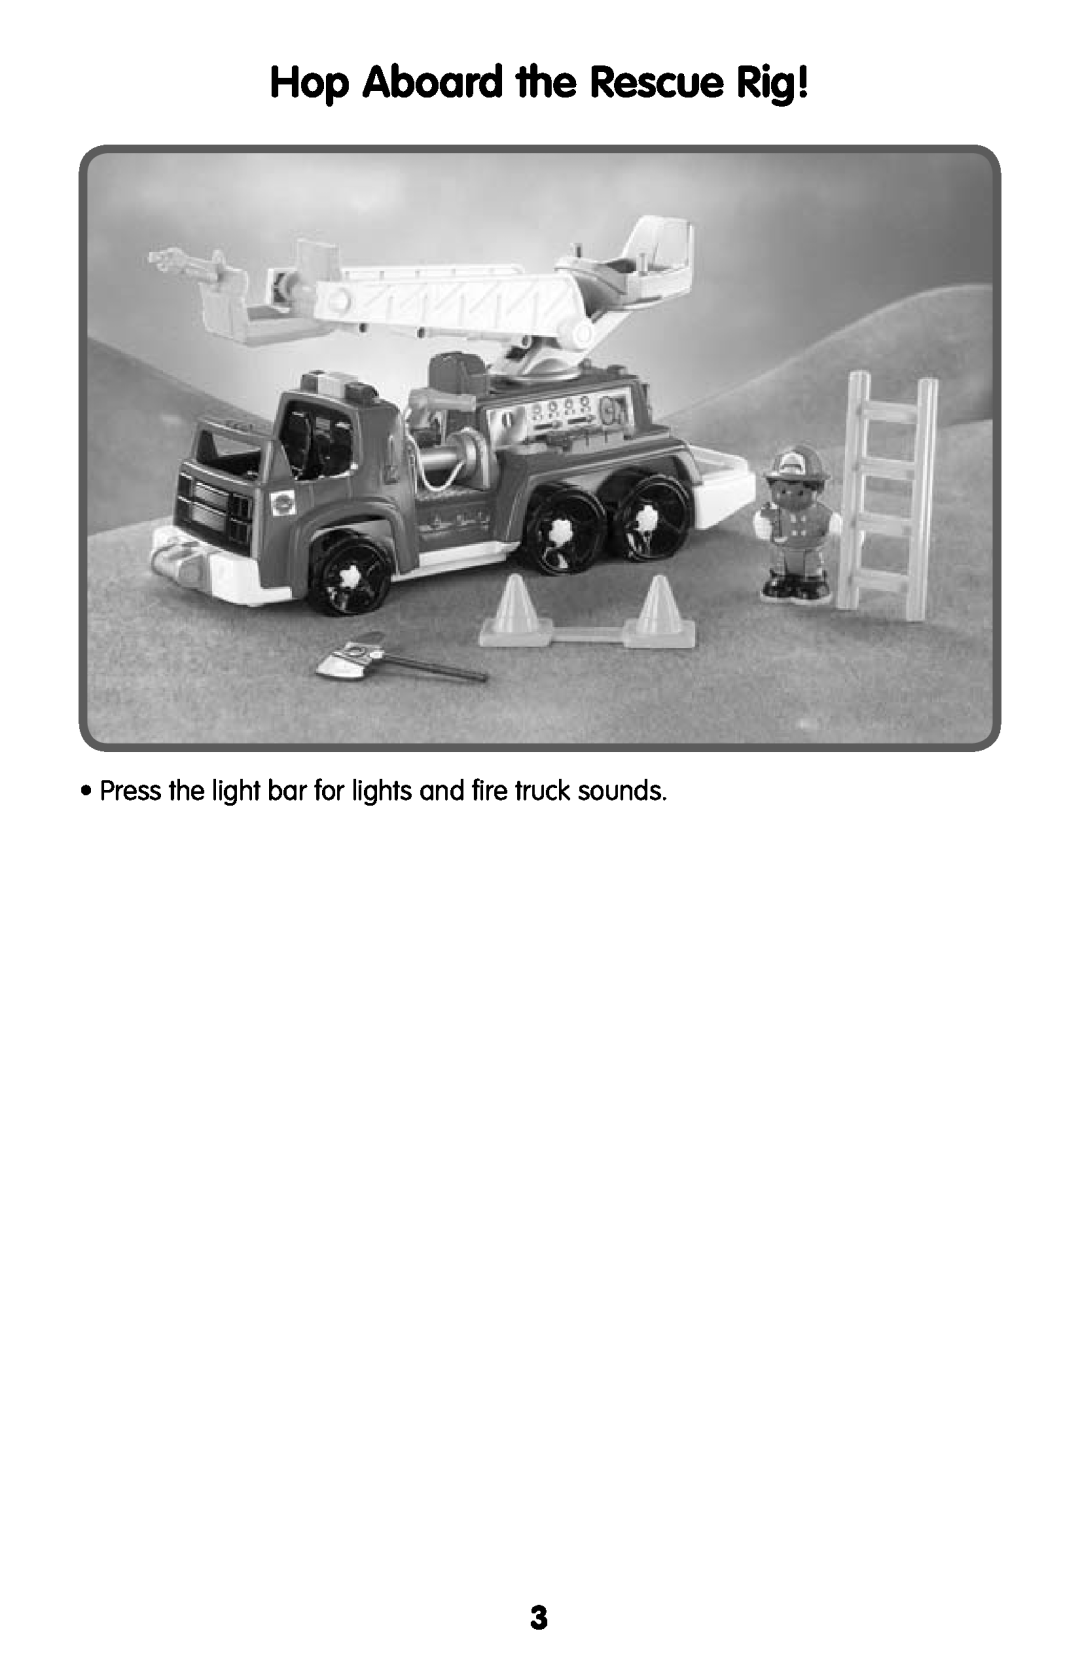 Fisher-Price L3940 instruction sheet Hop Aboard the Rescue Rig, Press the light bar for lights and fire truck sounds 